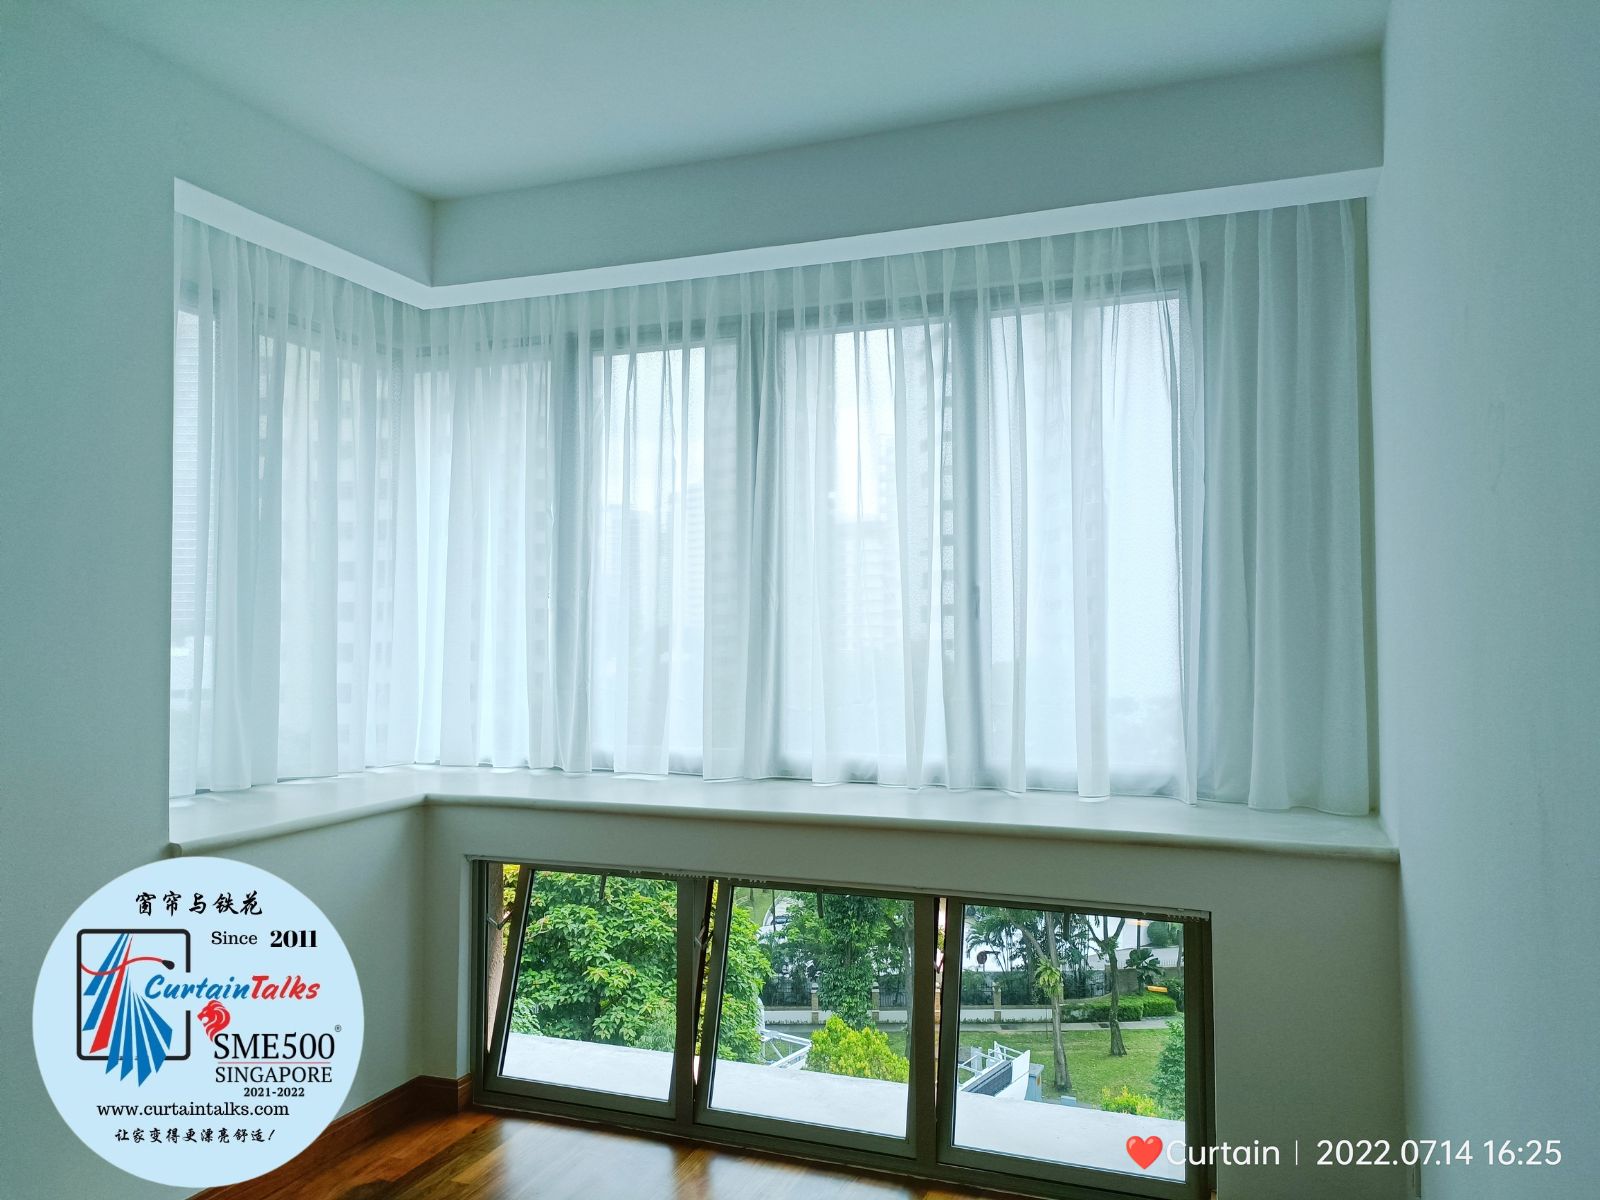 This is a Picture of Day and night curtain picture  for Singapore HDB, day and night curtain for master bedroom, 94 Dawson road